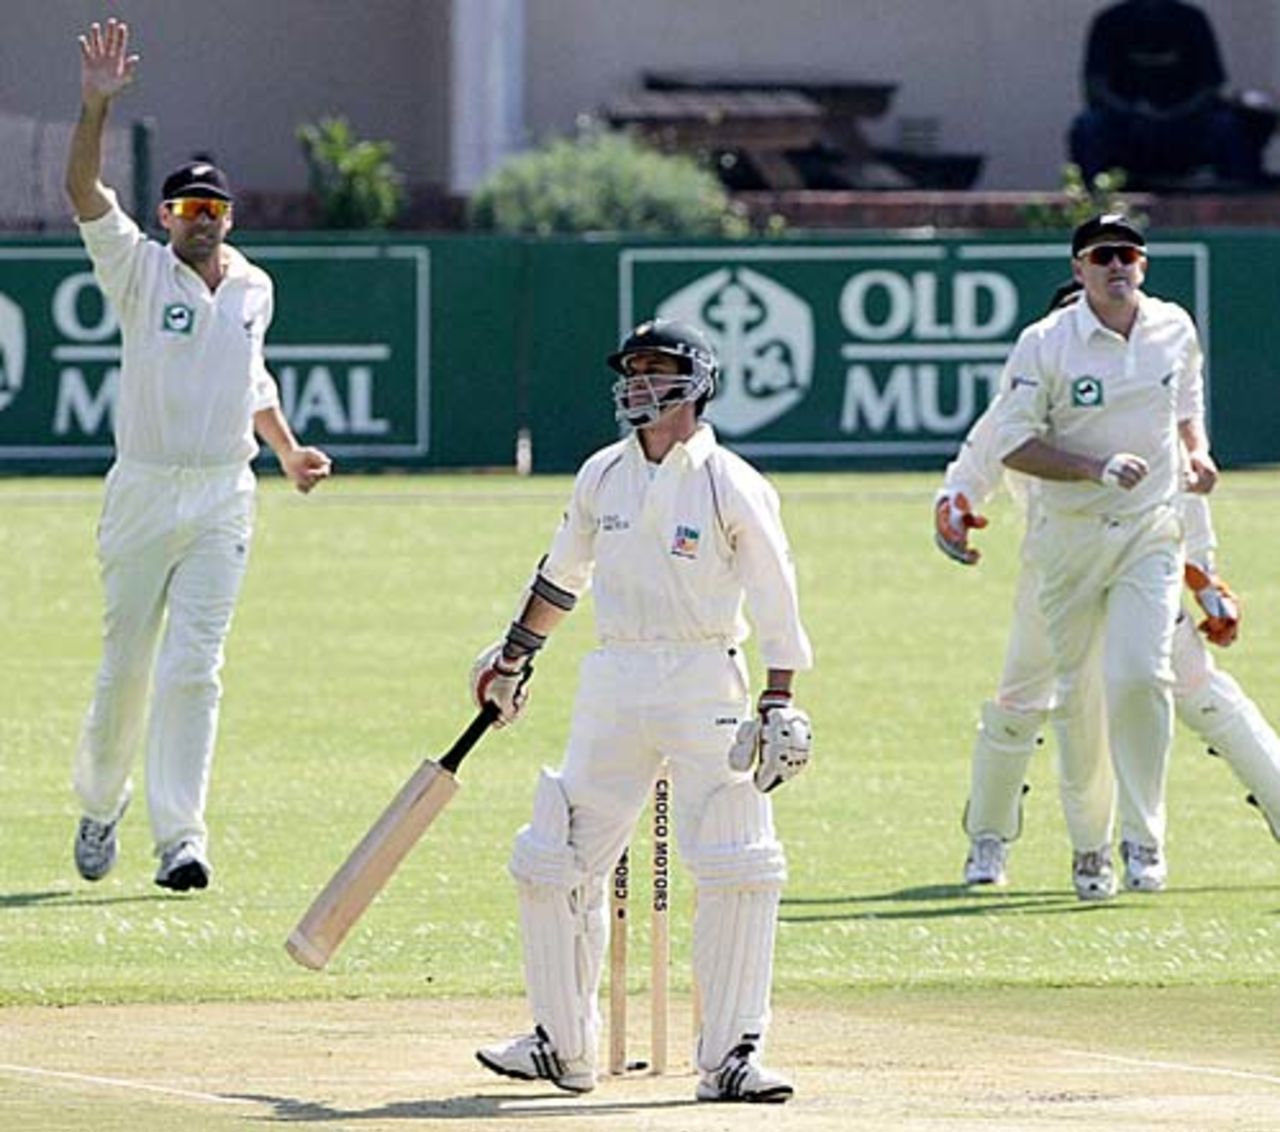 Neil Ferreira caught behind by Brendon McCullum off James Franklin for 5, Zimbabwe v New Zealand, 1st Test, Harare, August 8, 2005